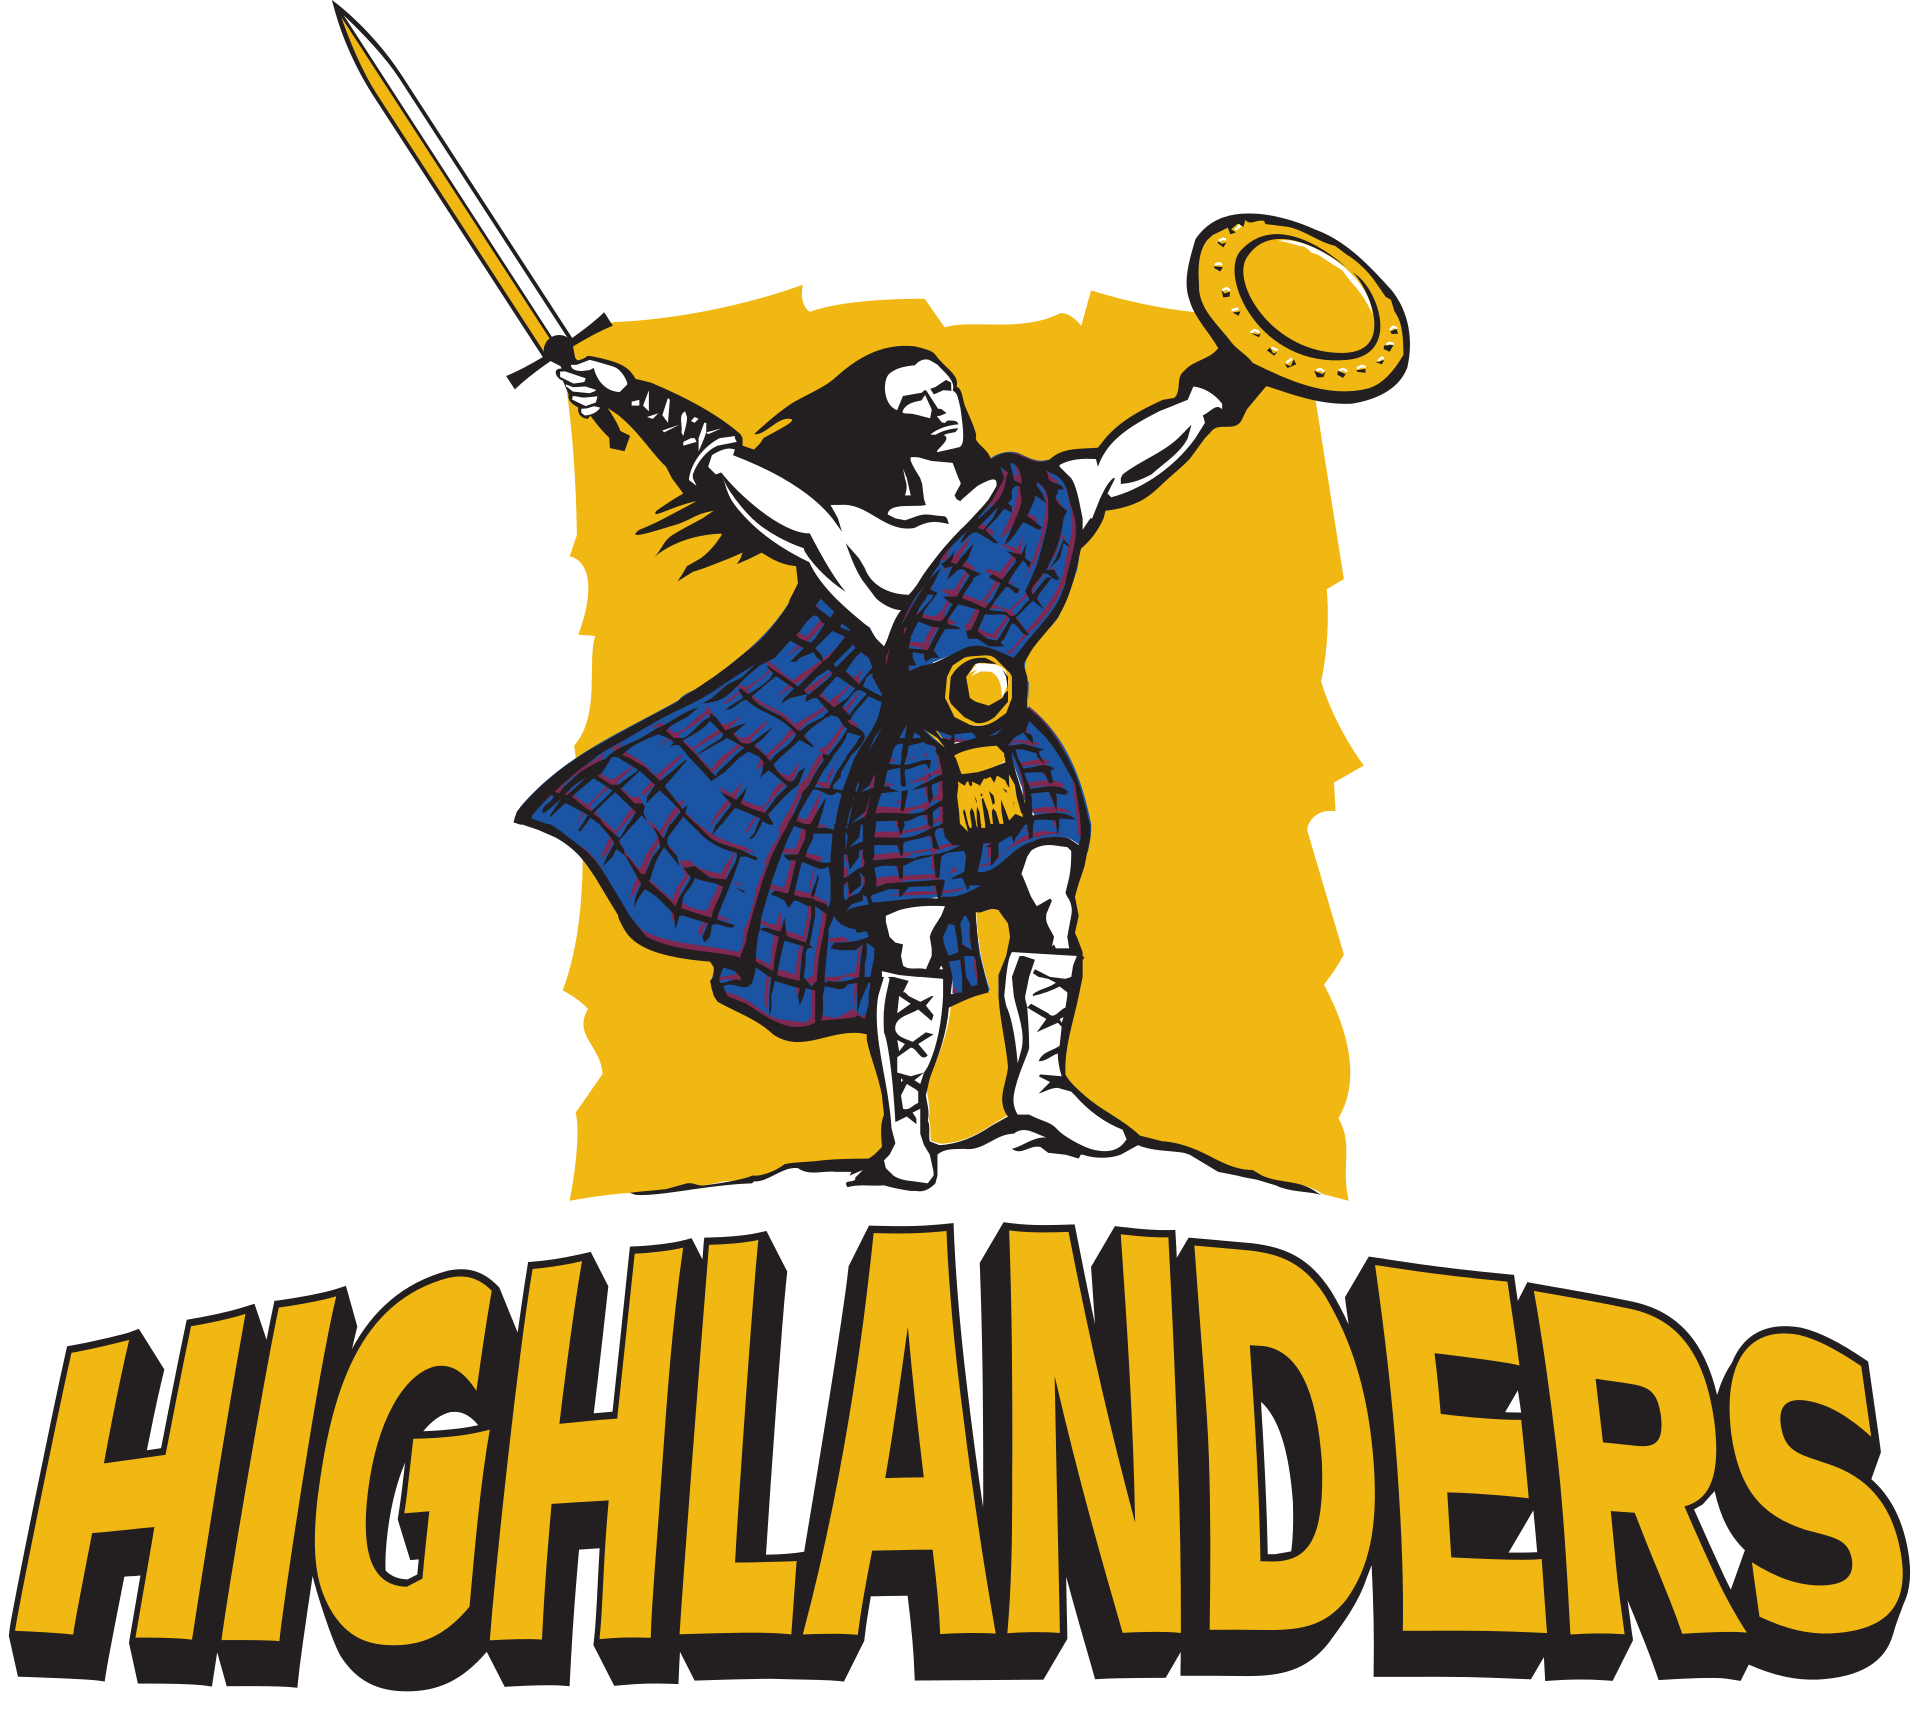 Official painting sponsor of the Highlanders